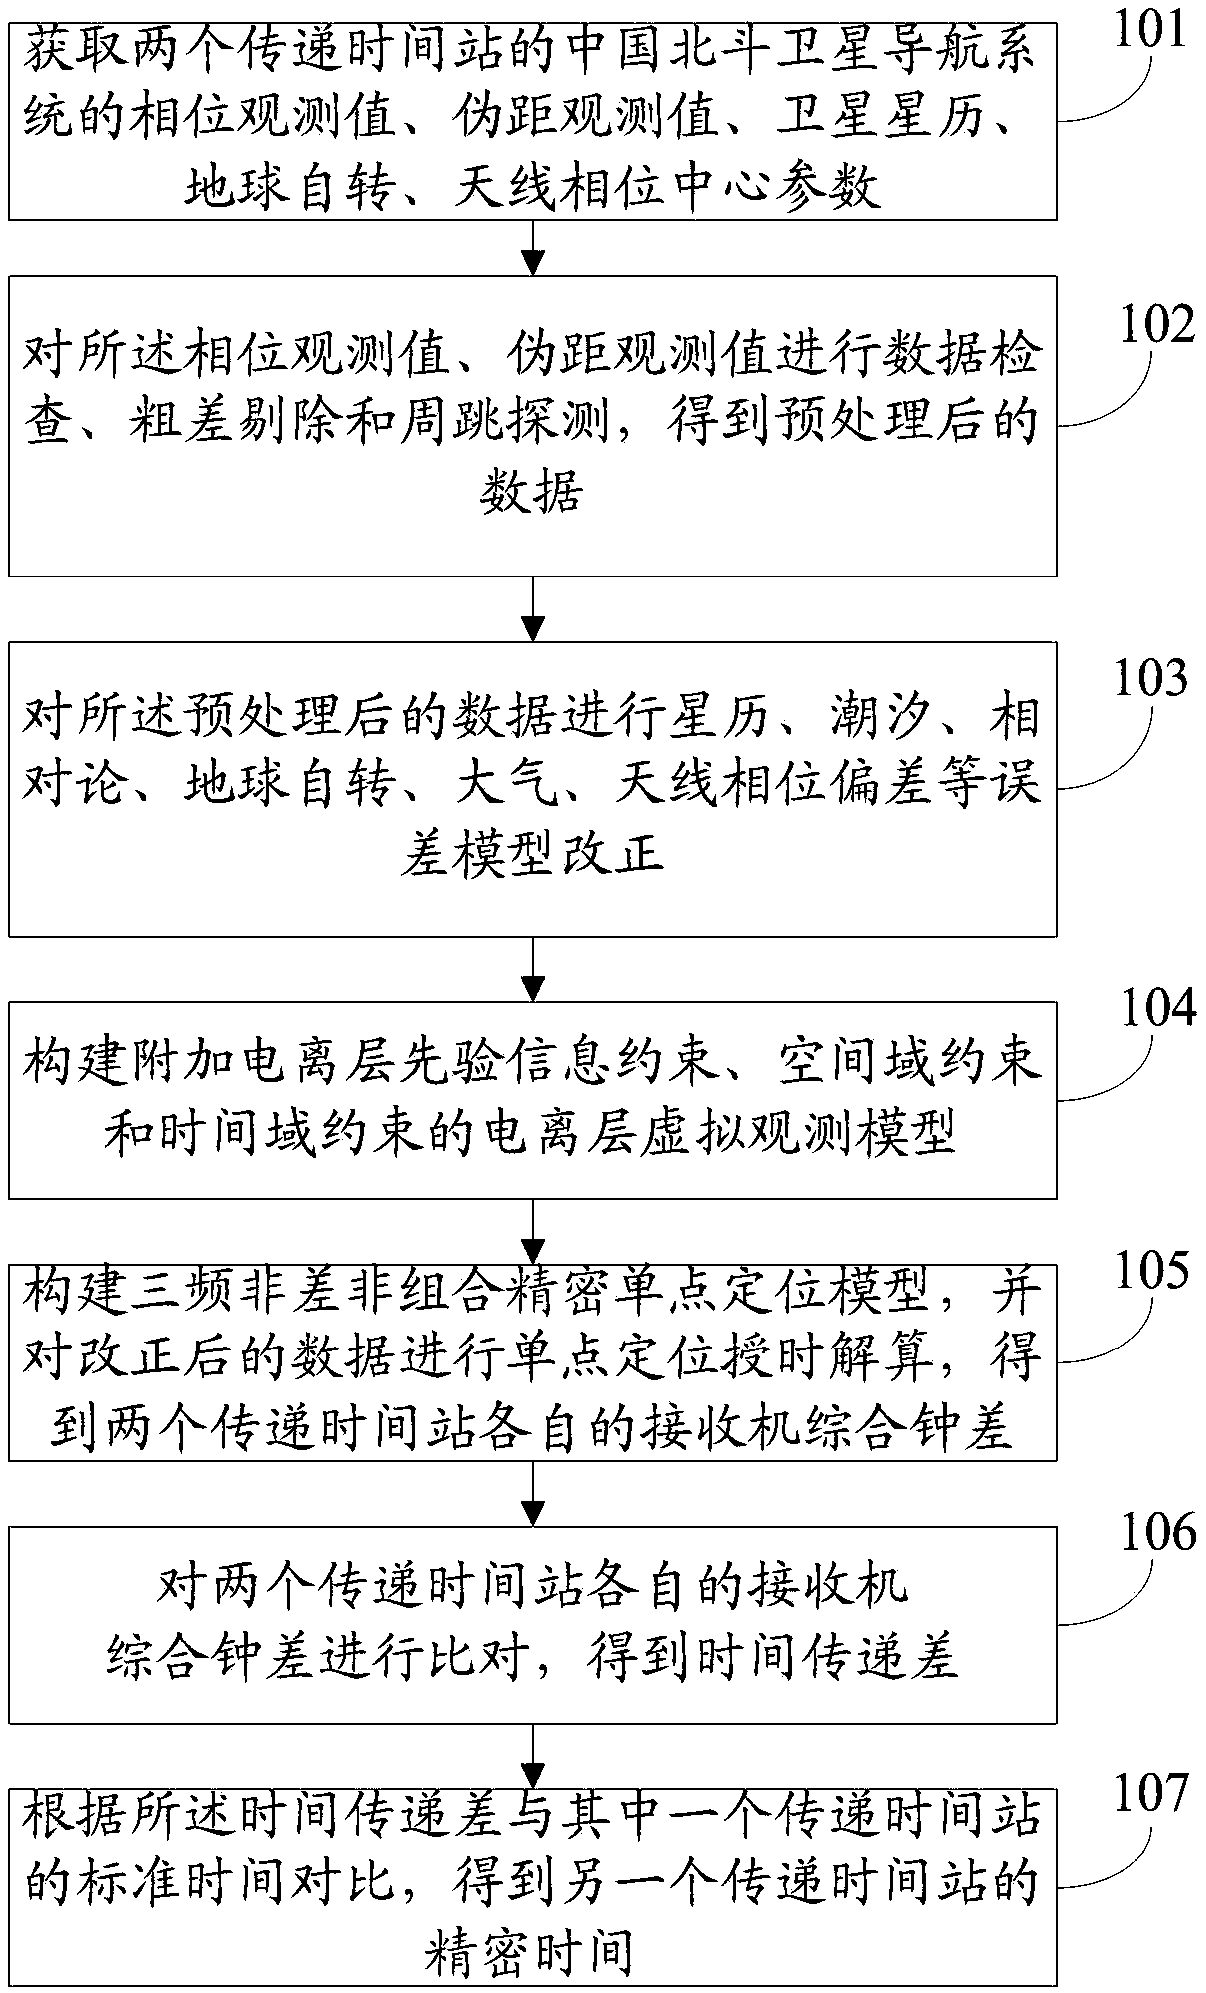 Beidou three-frequency non-differential non-combined observation value time transmission system and method